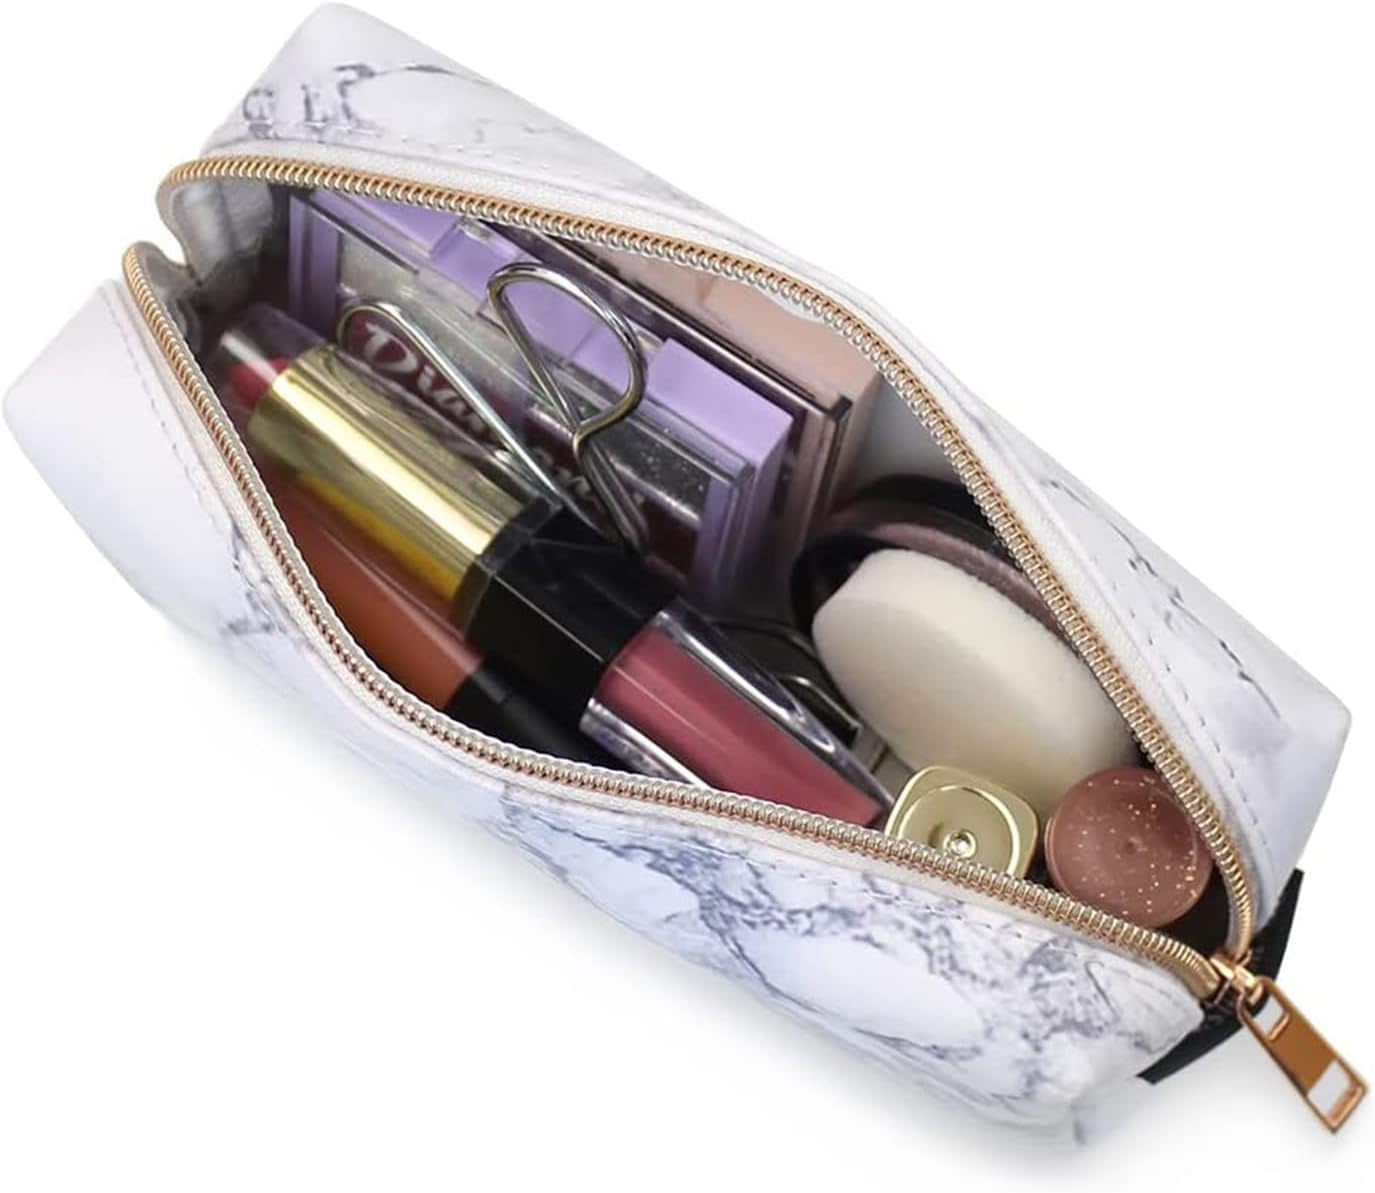 Fashion Stationery-White Marble Pencil Case for Women Girls Teenagers Make up Bags Ladies Cosmetic Bag or Gifts for Her for Girl